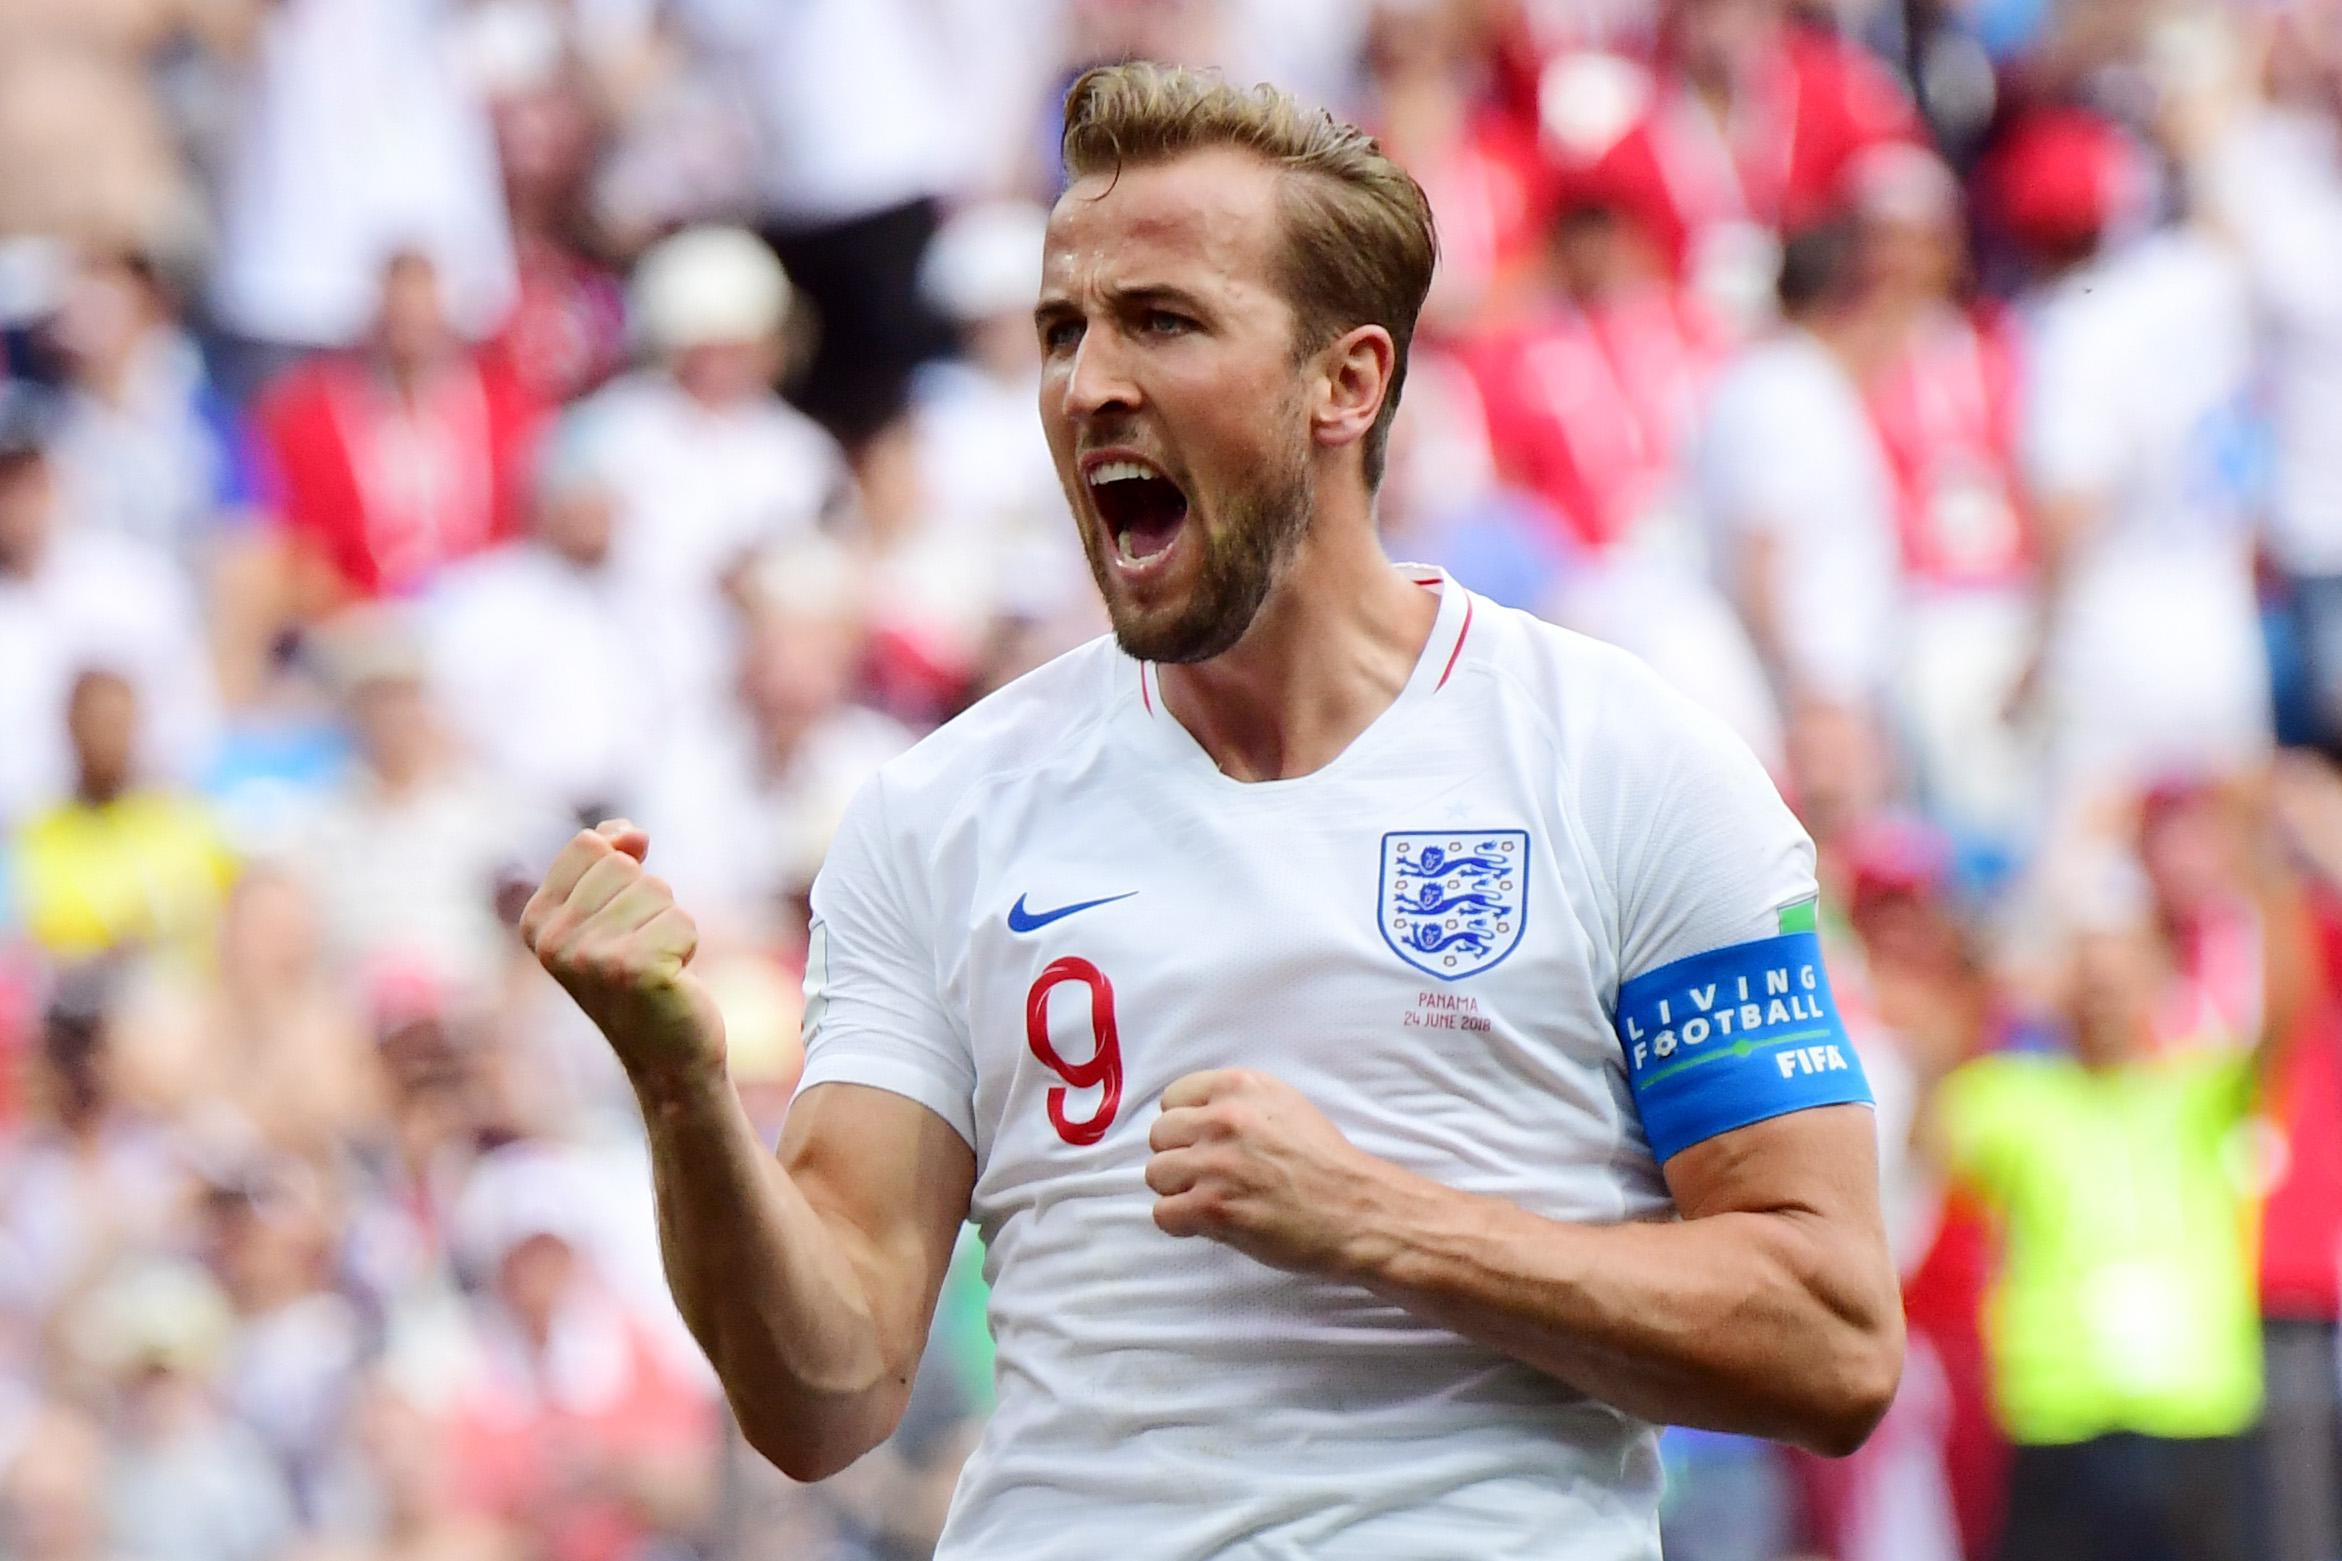 TOPSHOT - England's forward Harry Kane celebrates after scoring his team's fifth goal during the Russia 2018 World Cup Group G football match between England and Panama at the Nizhny Novgorod Stadium in Nizhny Novgorod on June 24, 2018. (Photo by Martin BERNETTI / AFP) / RESTRICTED TO EDITORIAL USE - NO MOBILE PUSH ALERTS/DOWNLOADS        (Photo credit should read MARTIN BERNETTI/AFP/Getty Images)